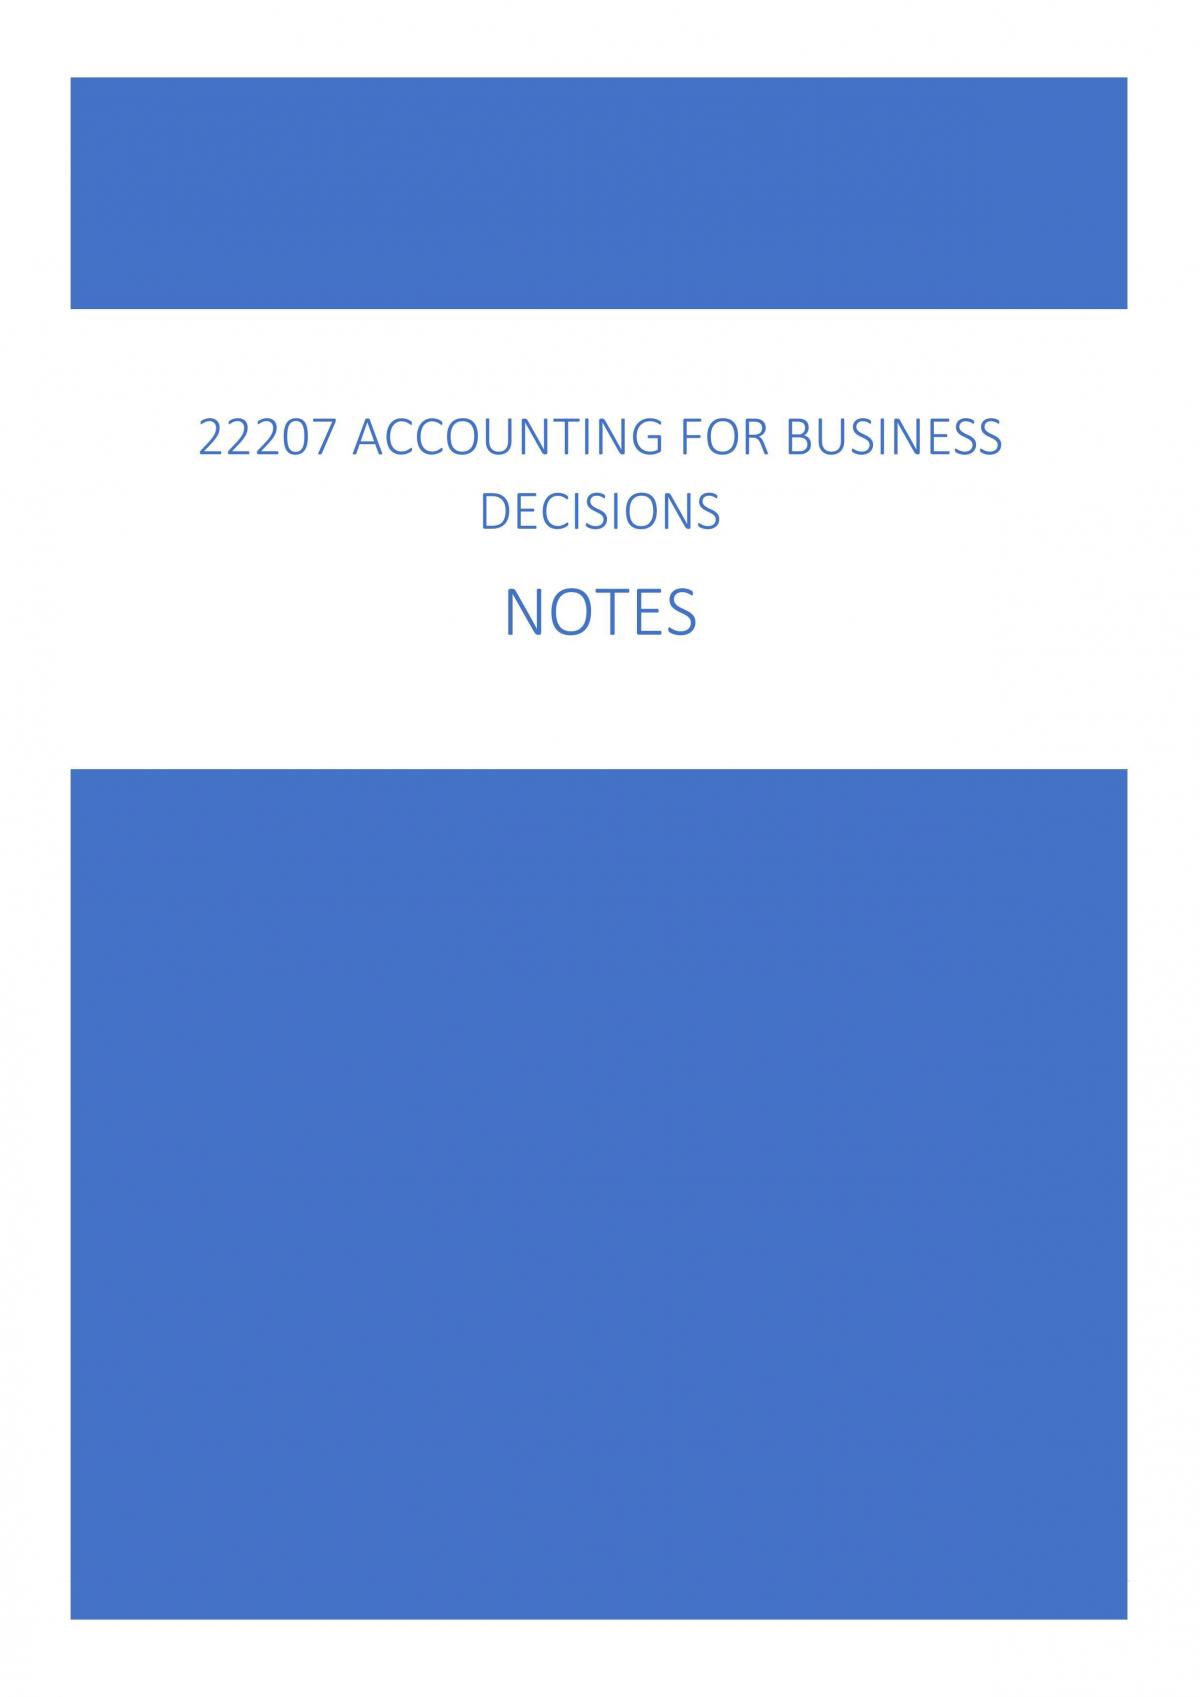 22207 Accounting for Business Decision Notes - Page 1